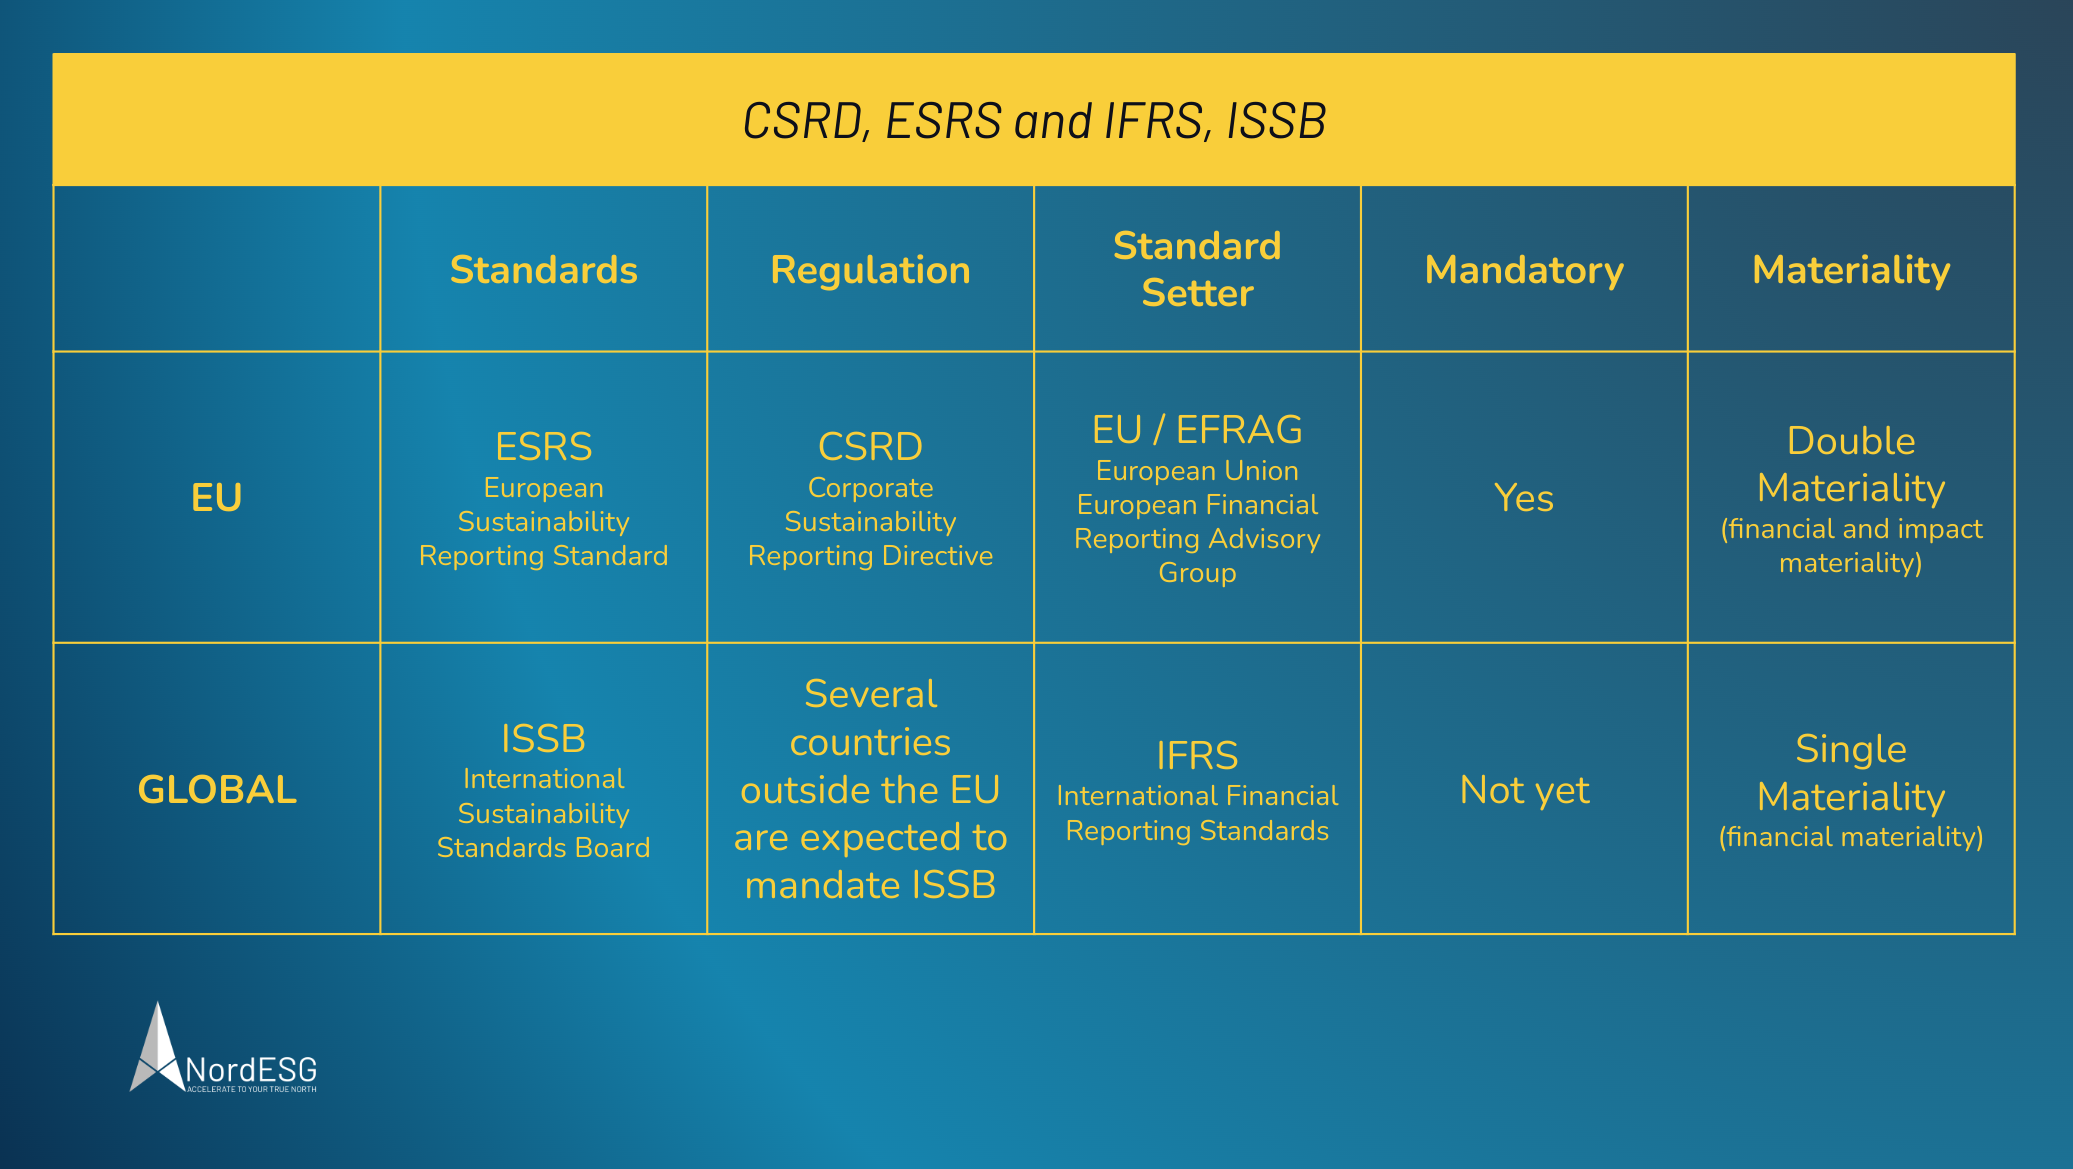 Comparison CSRD ESRS and IFRS ISSB - The Corporate Sustainability Reporting Directive and the "Brussels Effect" - How the CSRD will affect non-EU companies